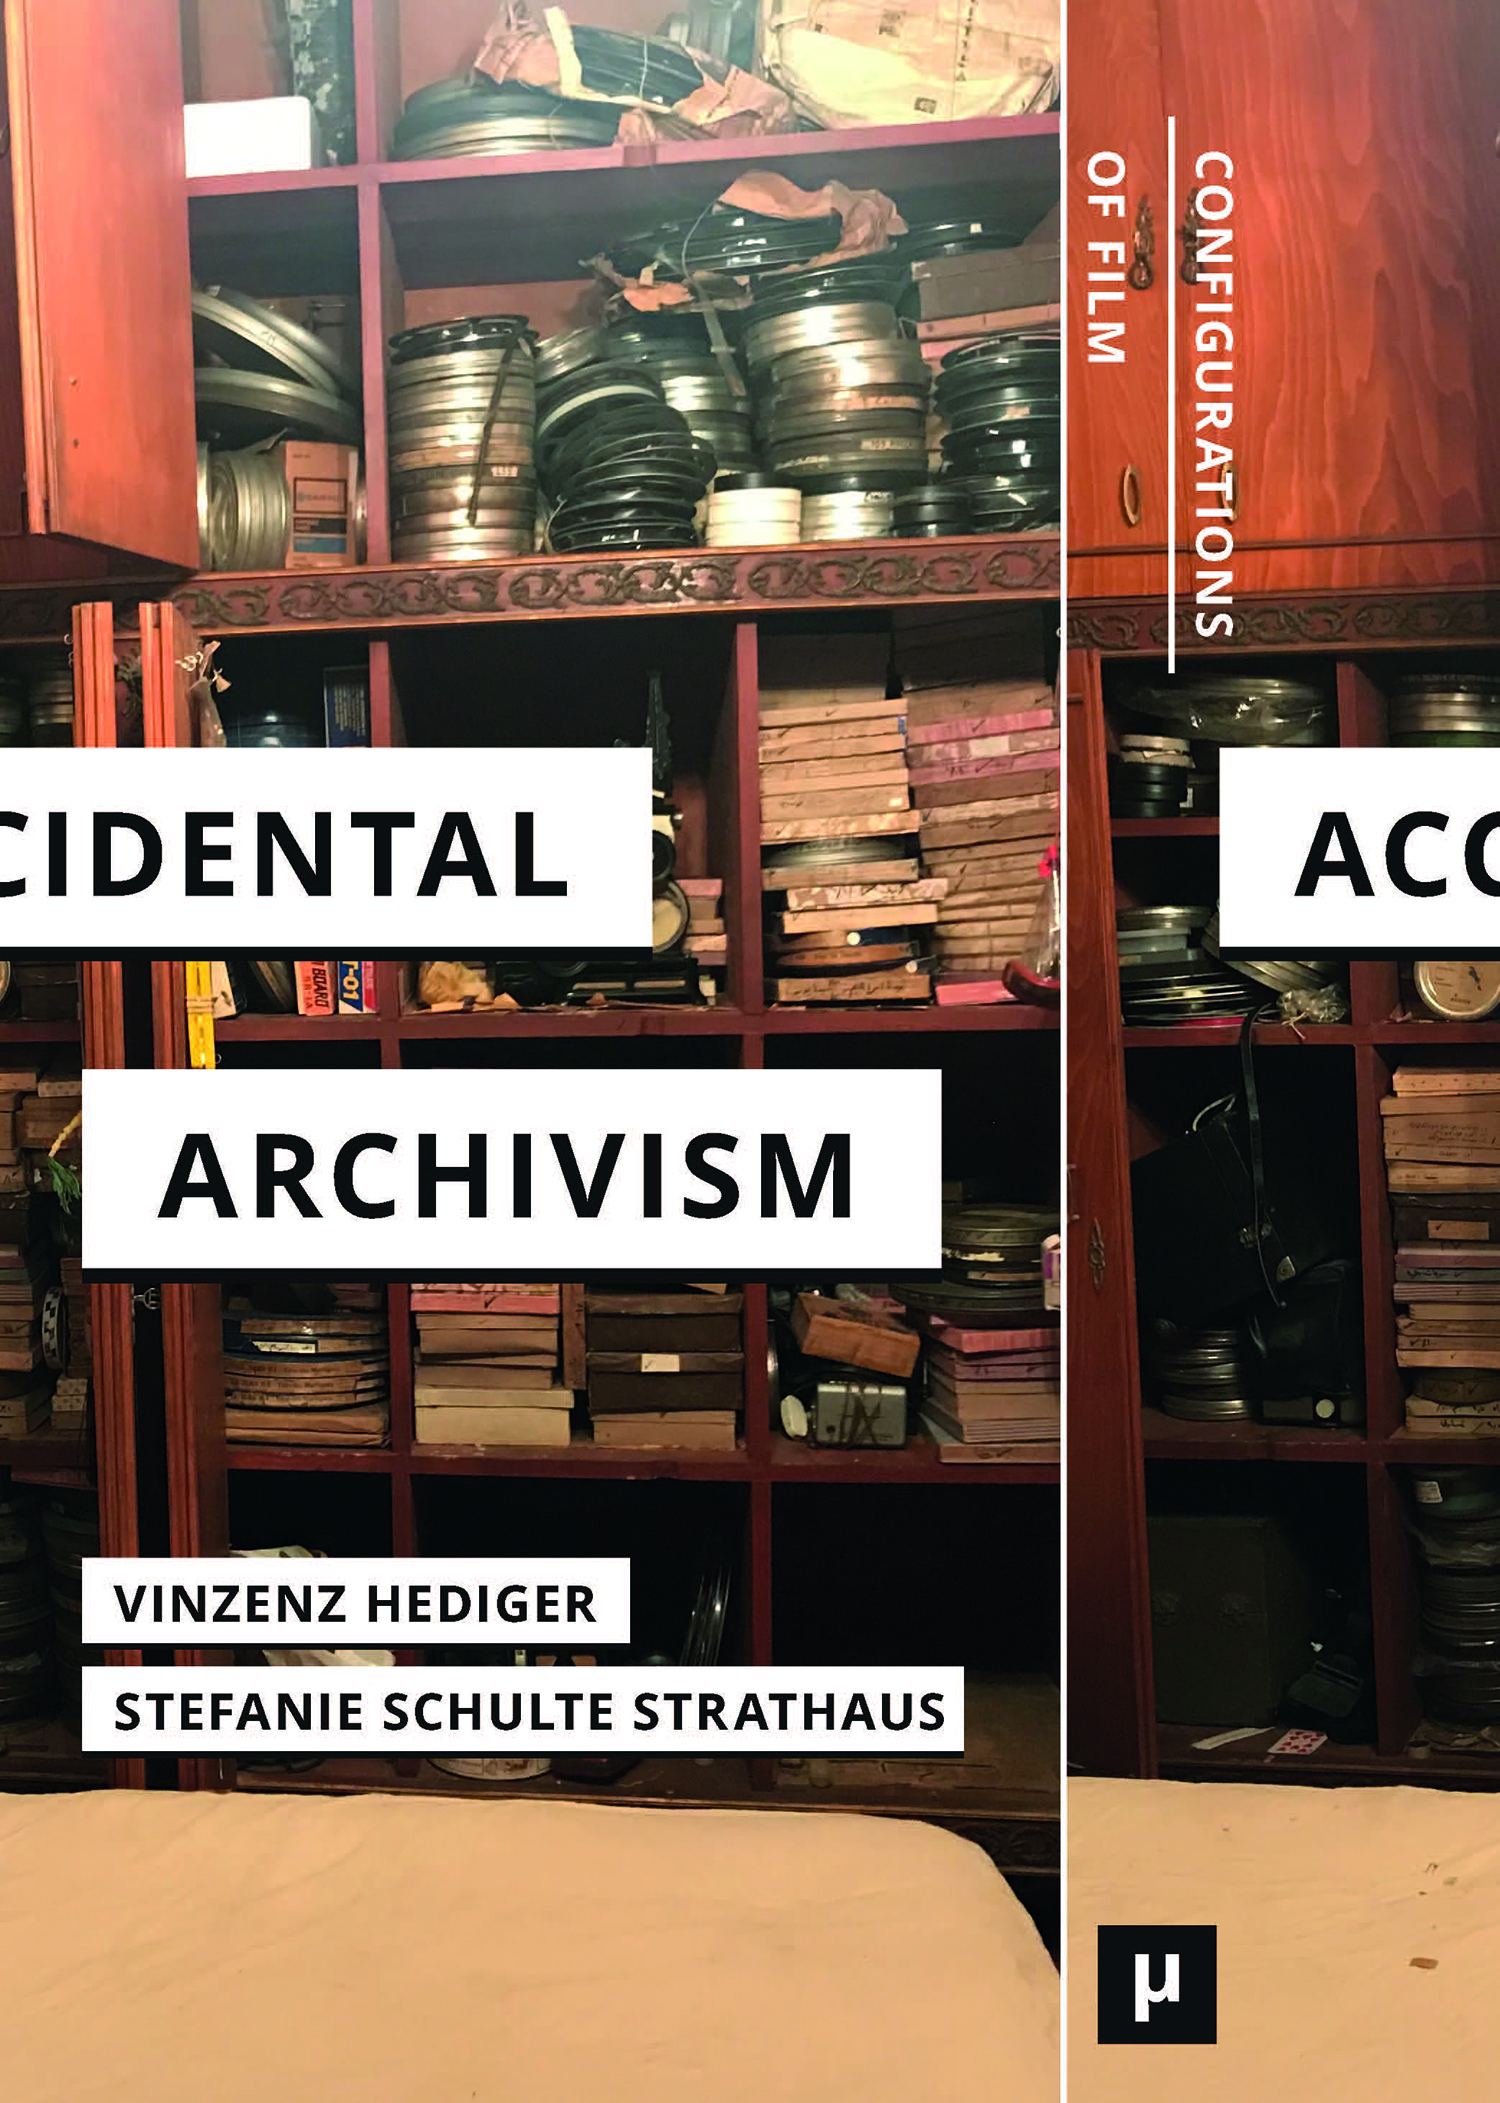 Accidental Archivism: Shaping Cinema’s Futures with Remnants of the Past (meson press eG, 2023)